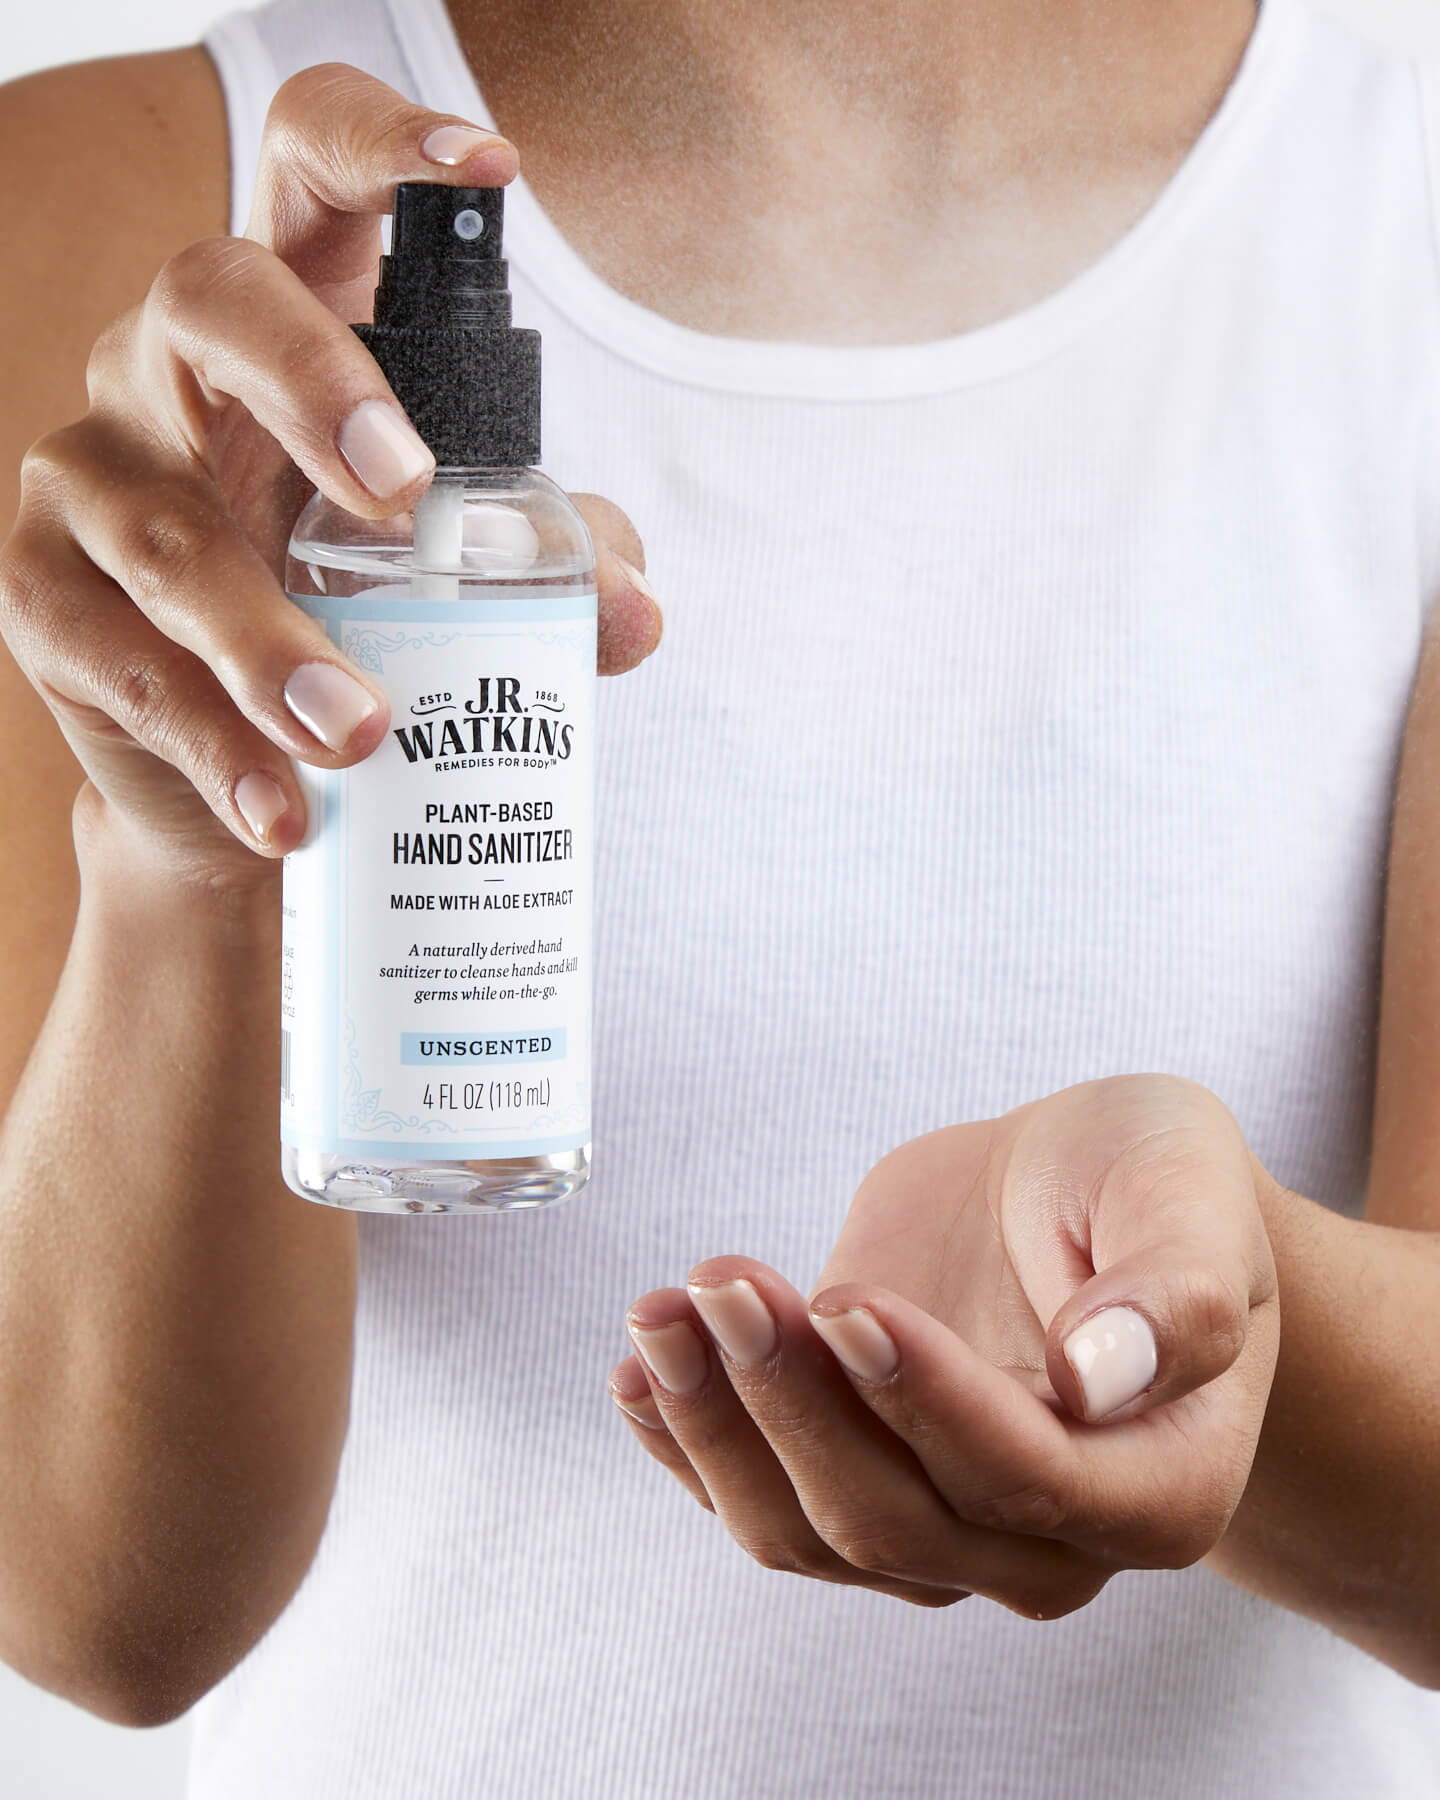 How To Use - Unscented Plant-Based Hand Sanitizer